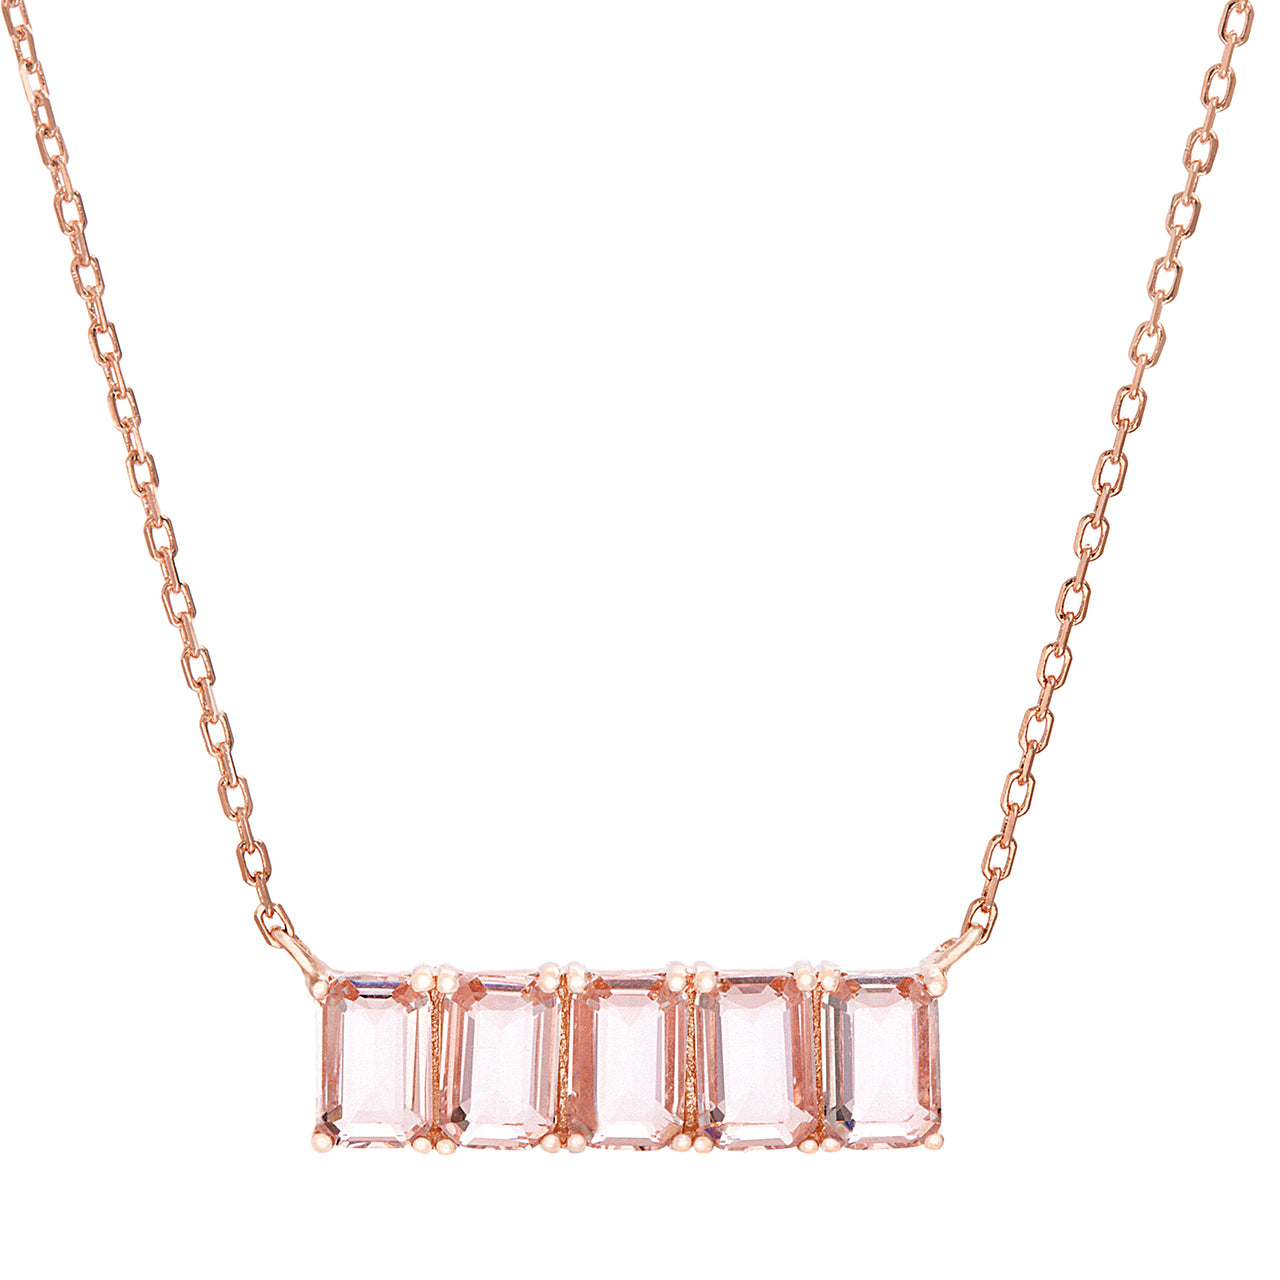 Lesa Michele Rose Gold Plated Bar Necklace in Sterling Silver